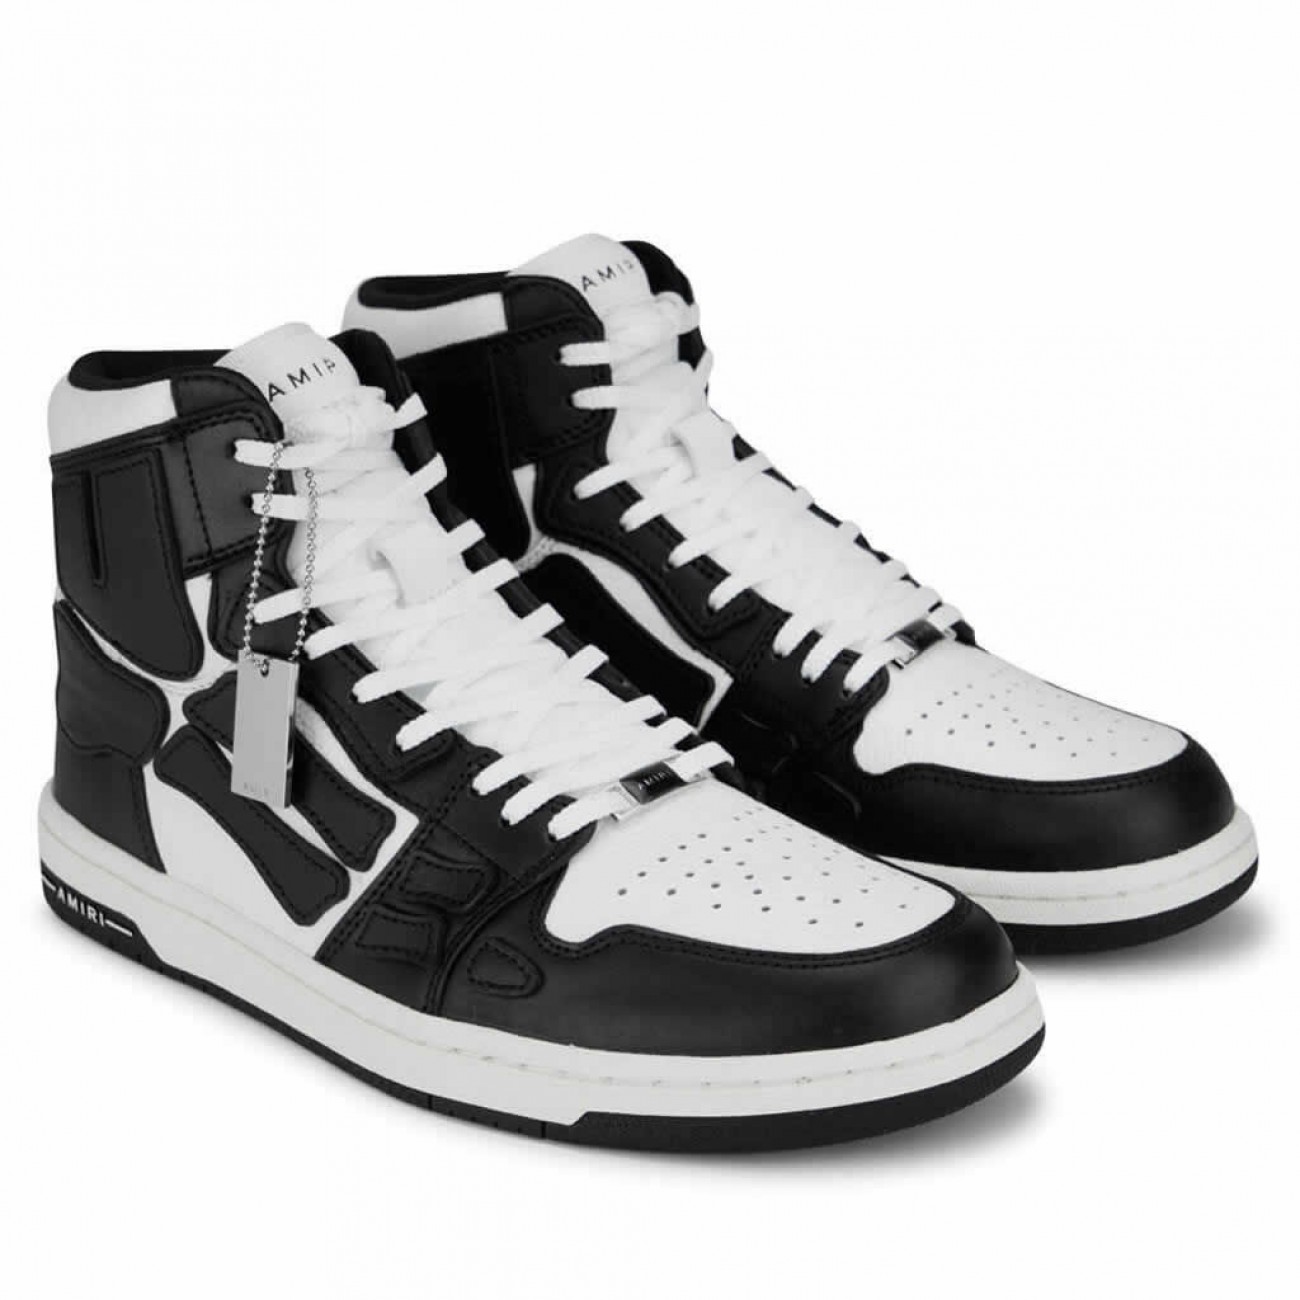 A.M.I.R.I Skel Top High Leather Sneakers Black White MFS002-004